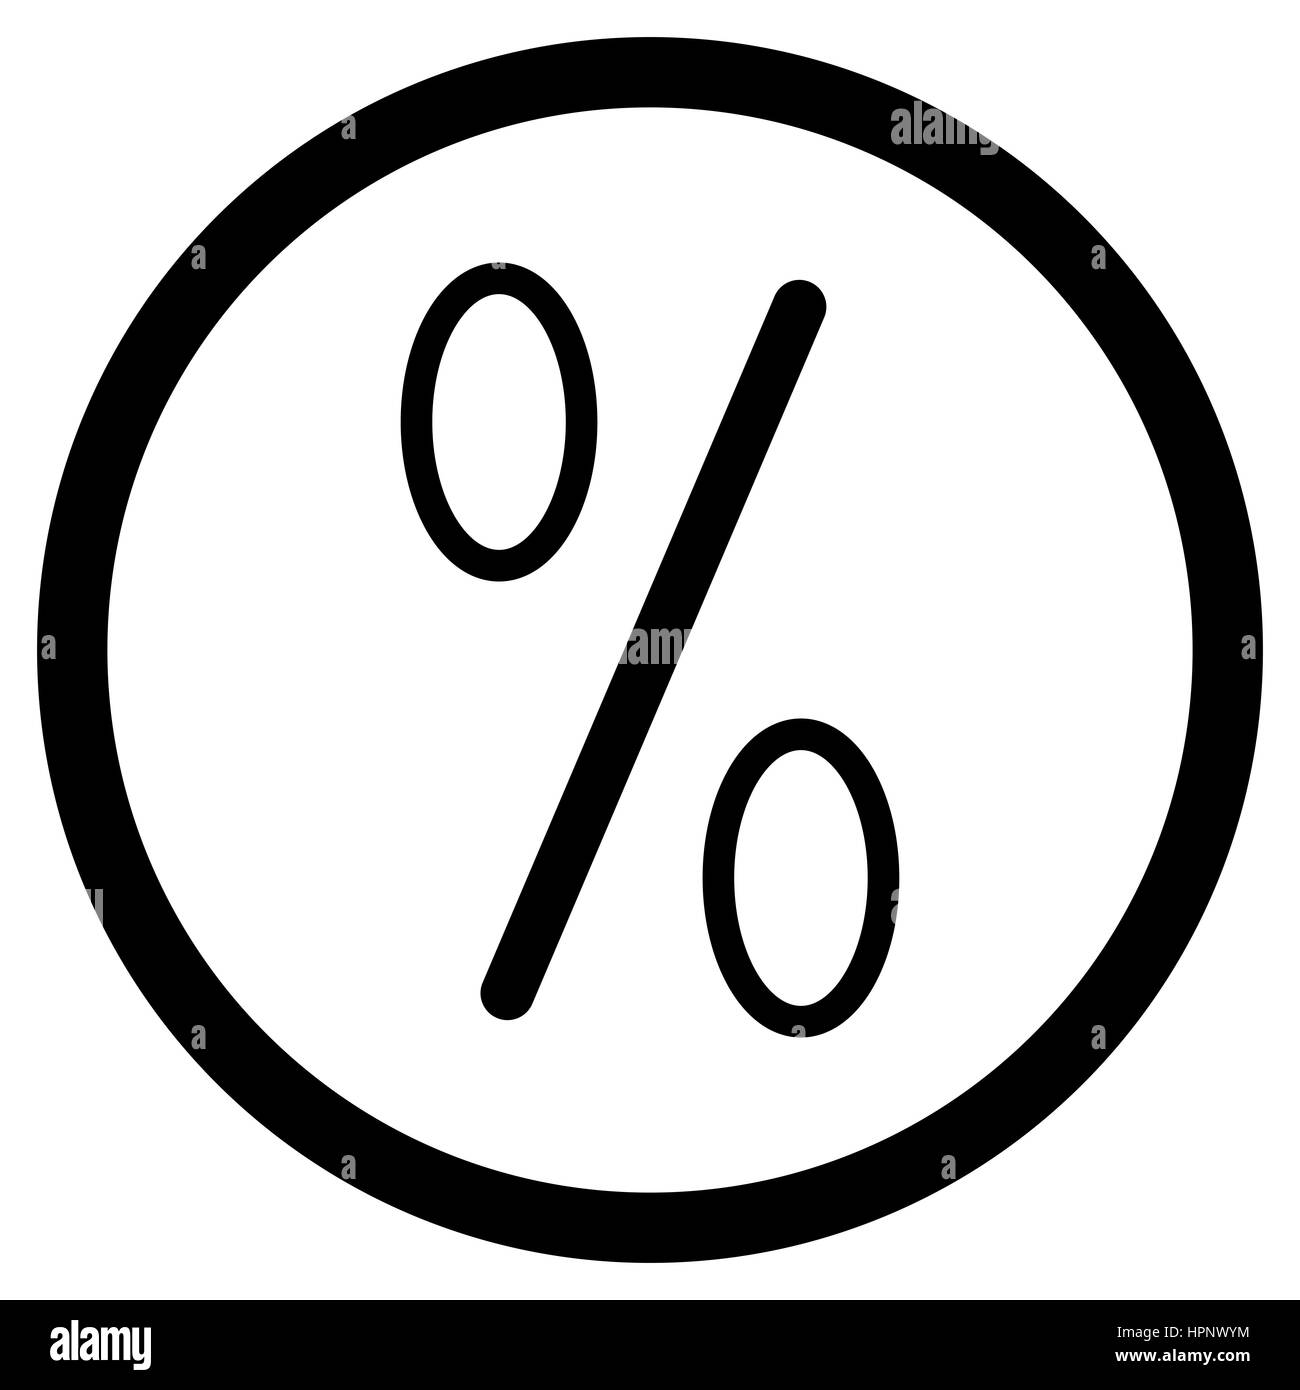 Icon percent vector in round. App badge for investment illustration Stock Photo